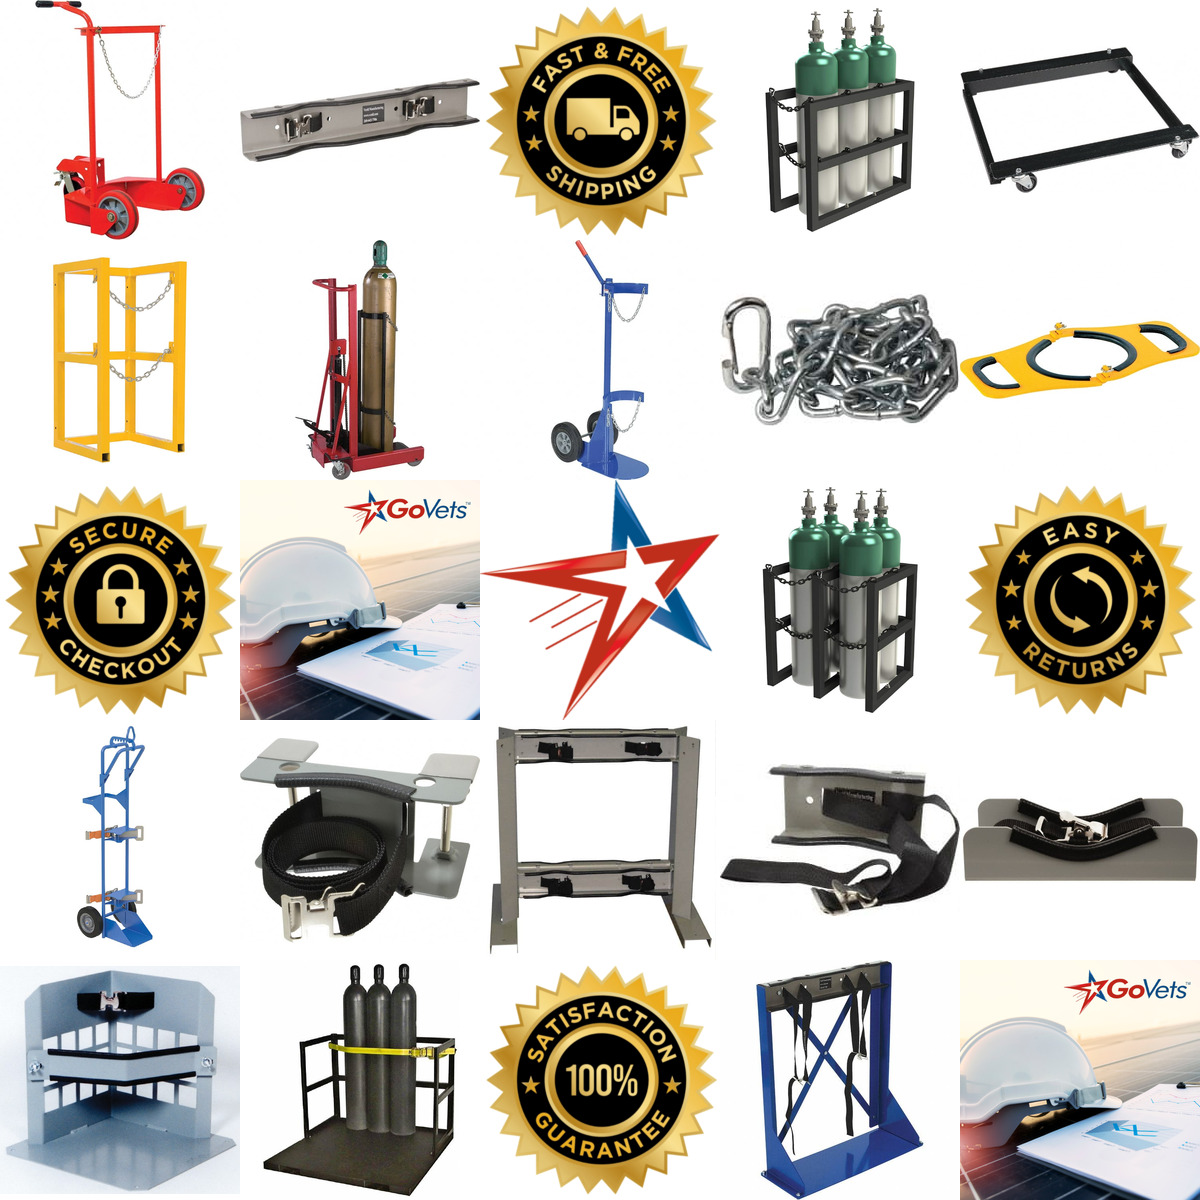 A selection of Gas Cylinder Holders and Accessories products on GoVets